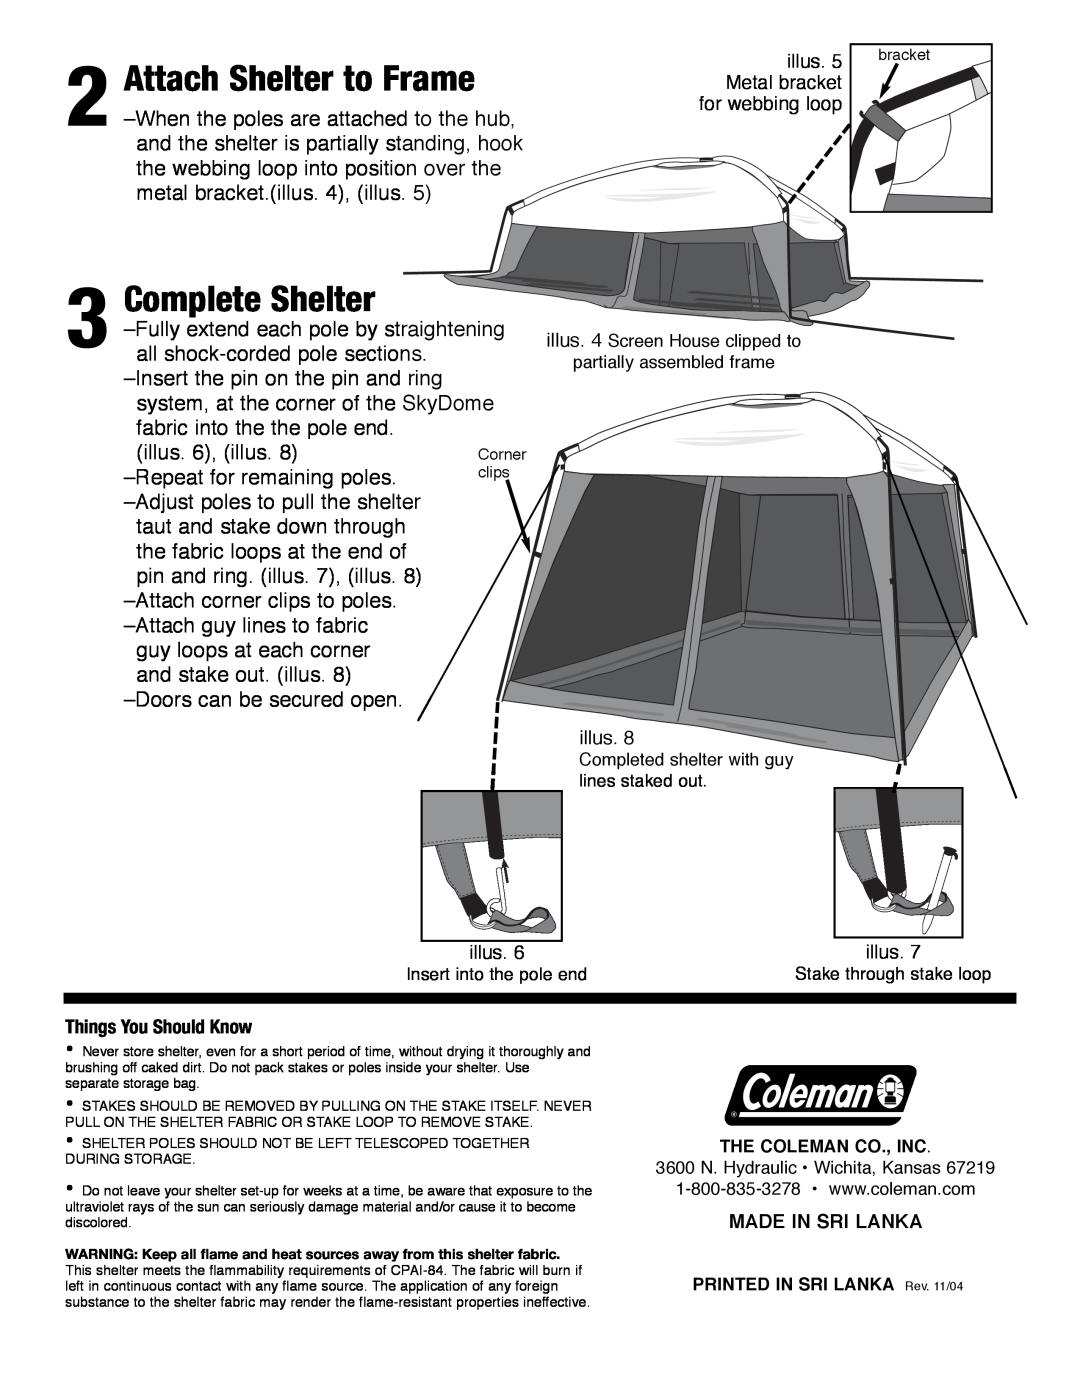 Coleman 9392-513 manual Attach Shelter to Frame, Complete Shelter 